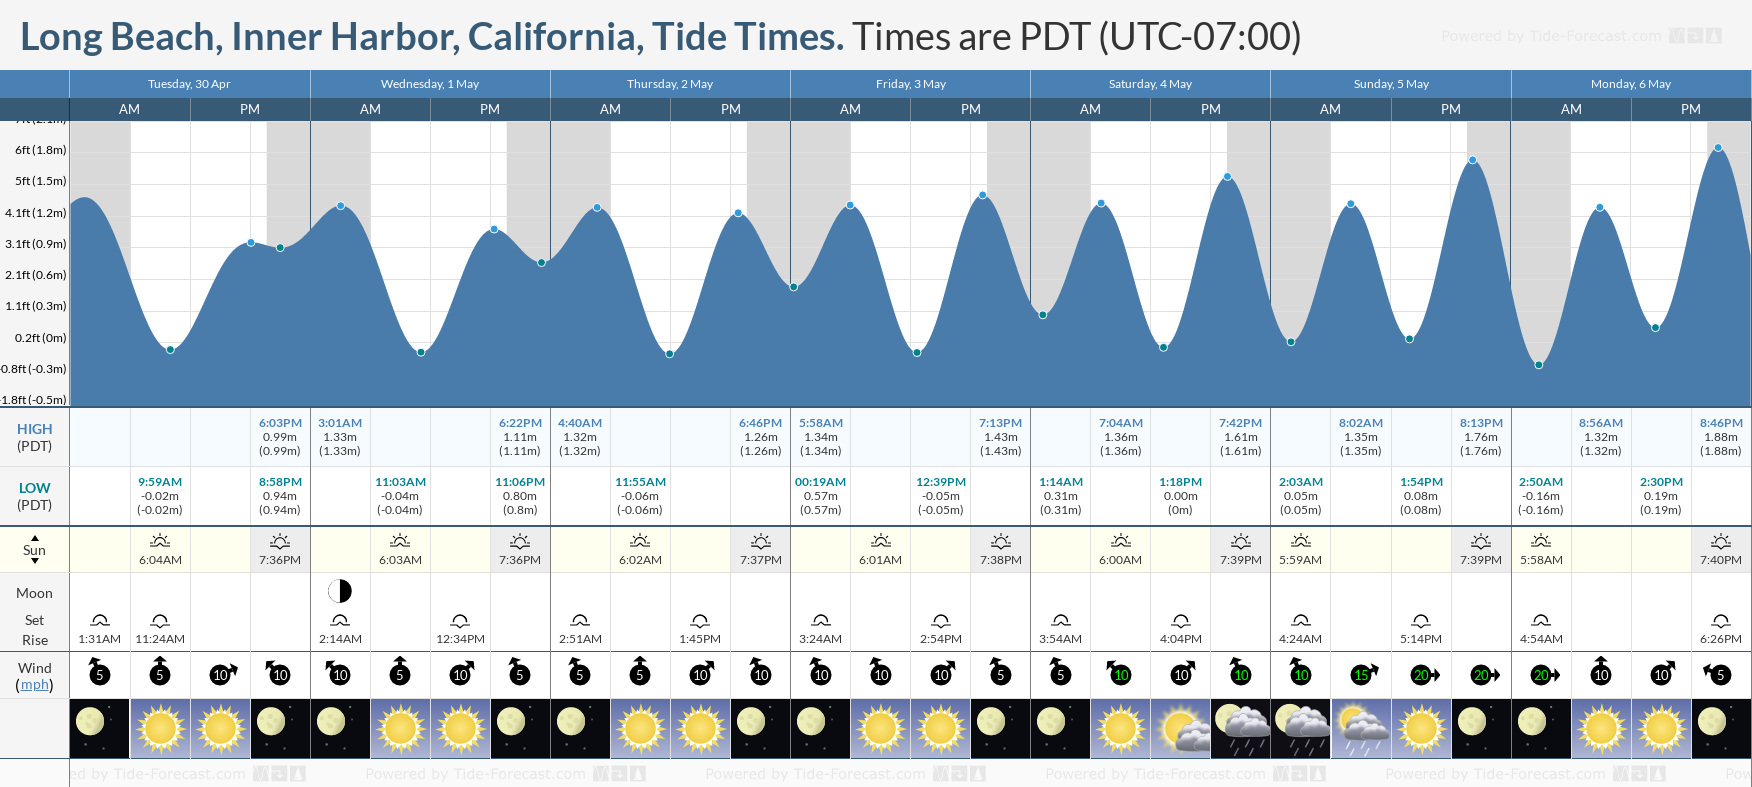 Long Beach, Inner Harbor, California Tide Chart including high and low tide tide times for the next 7 days